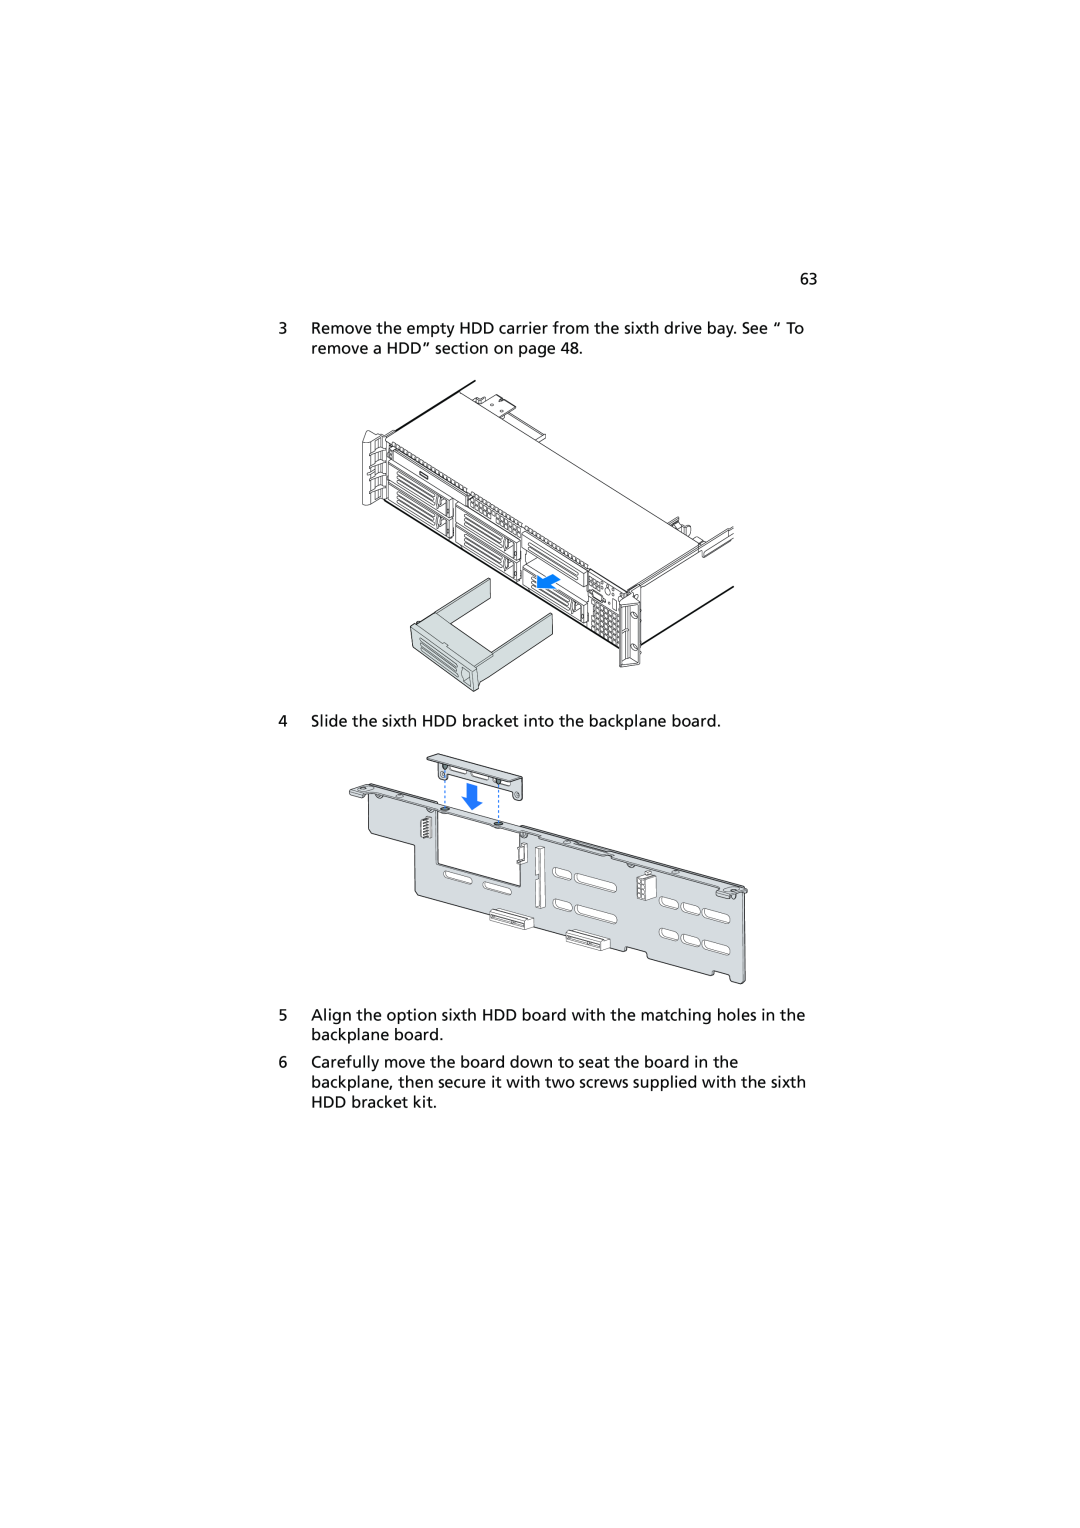 Acer R720 Series manual Slide the sixth HDD bracket into the backplane board 